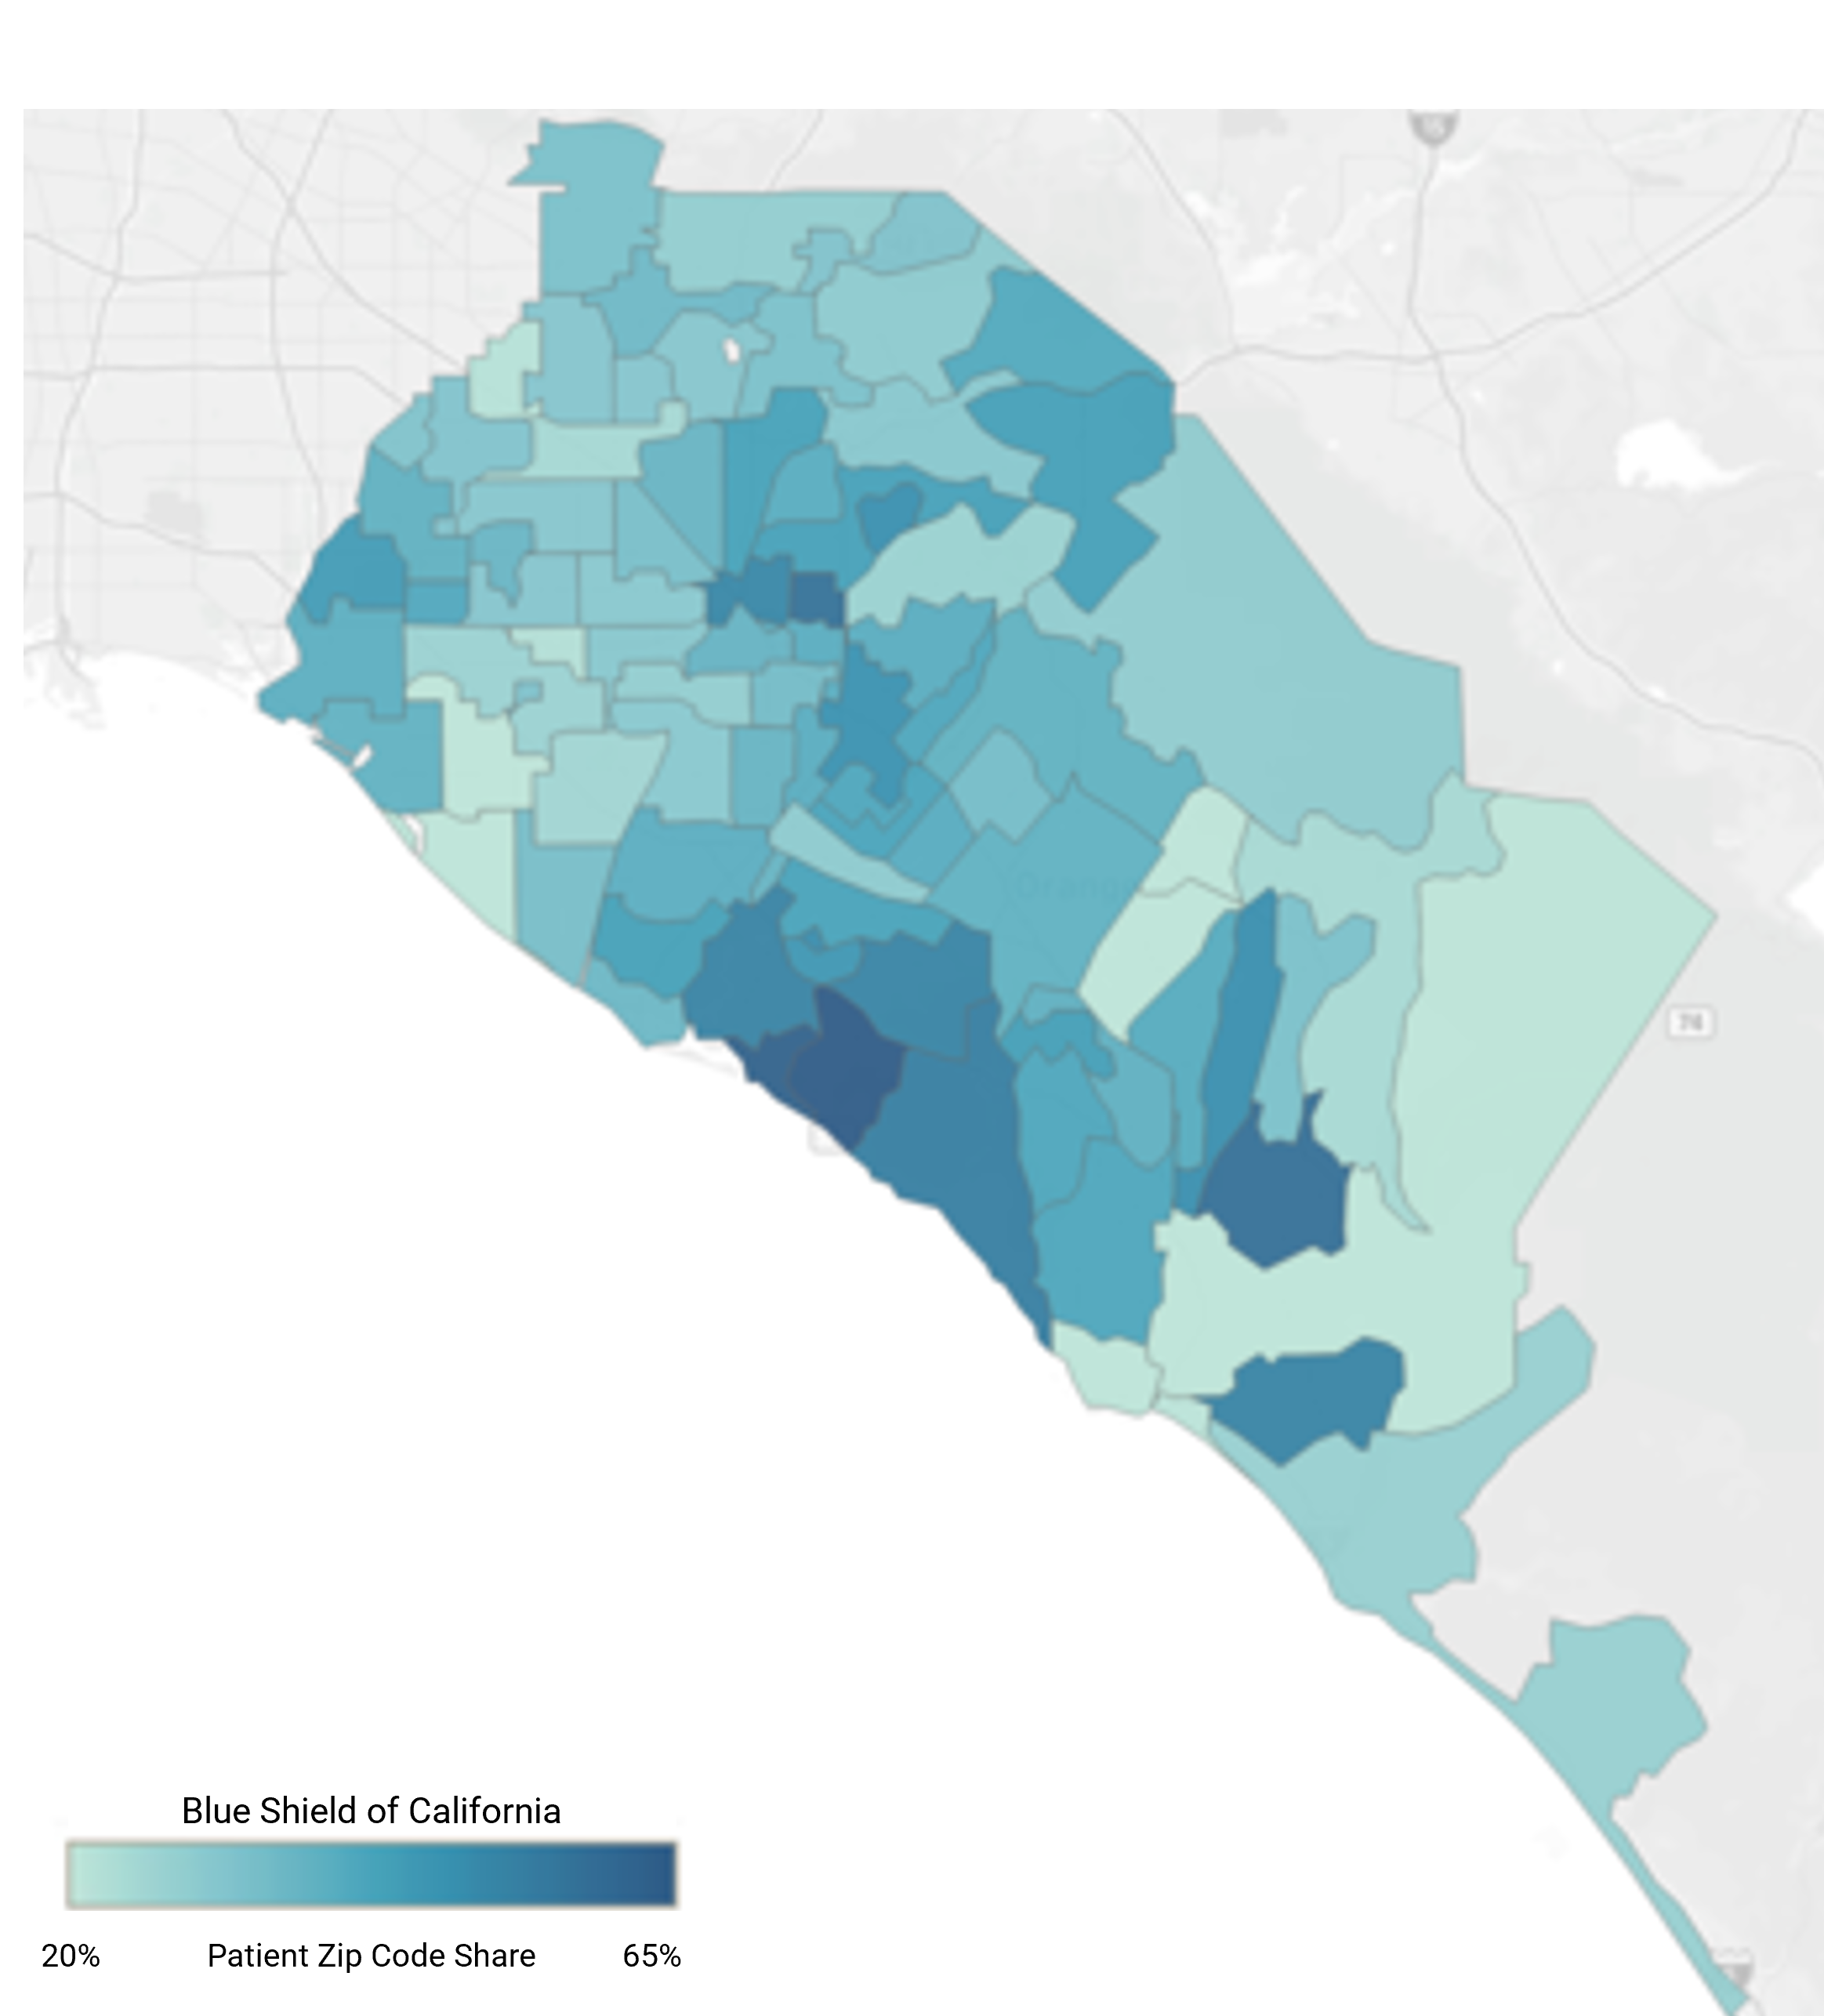 Choropleth map of Blue Shield of California’s market share in the Los Angeles Combined Statistical Area